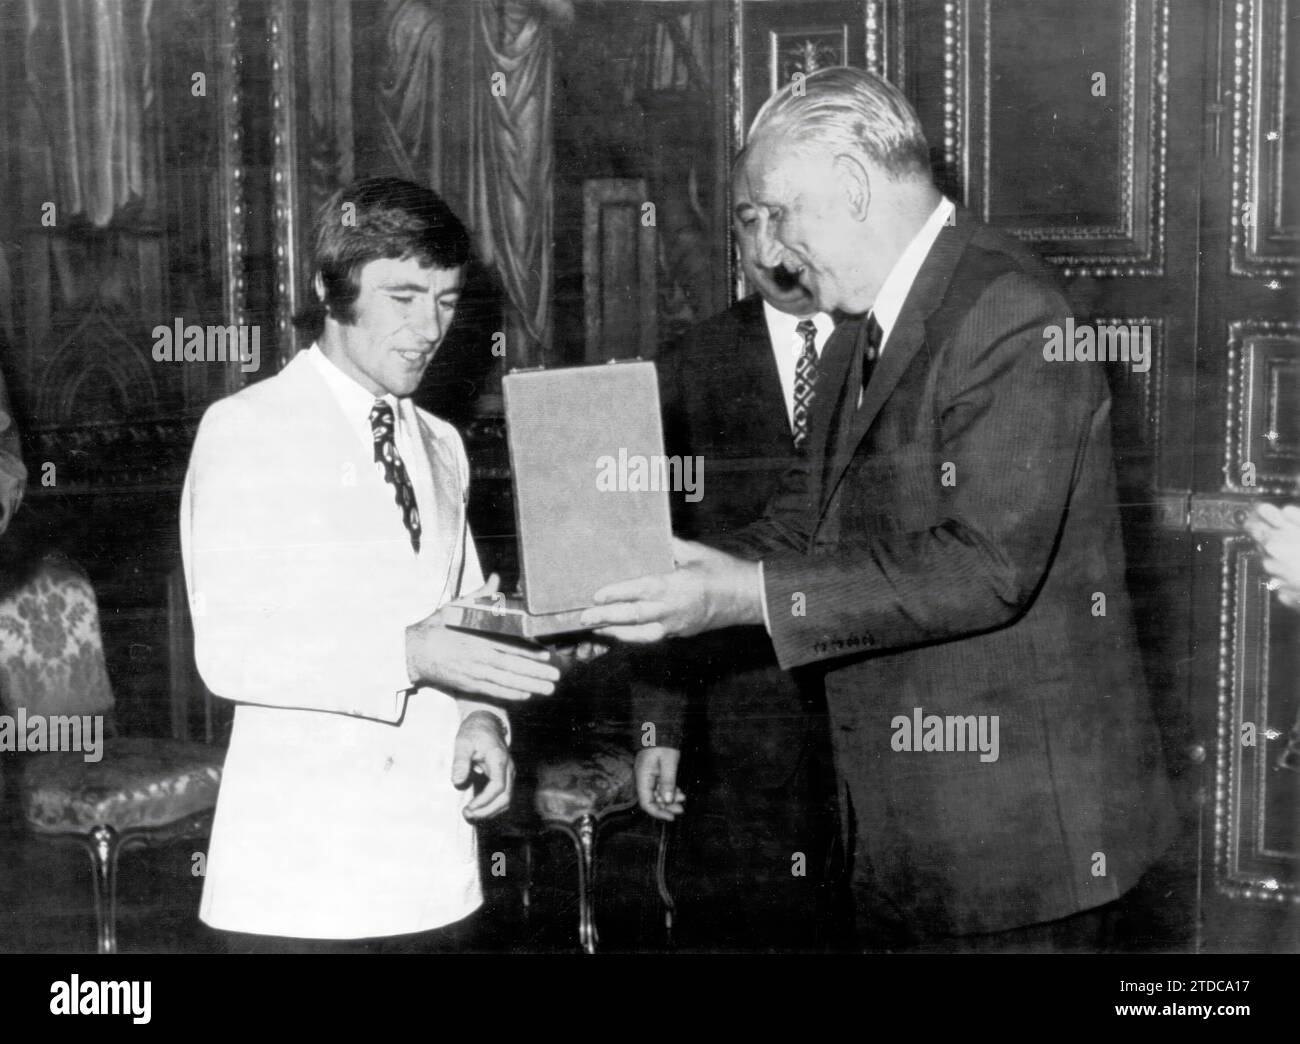 07/28/1970. The mayor of Barcelona presents the motorcycling world champion, Angel Nieto, with a plaque as a prize and souvenir of his performance at the Spanish Grand Prix. Credit: Album / Archivo ABC Stock Photo